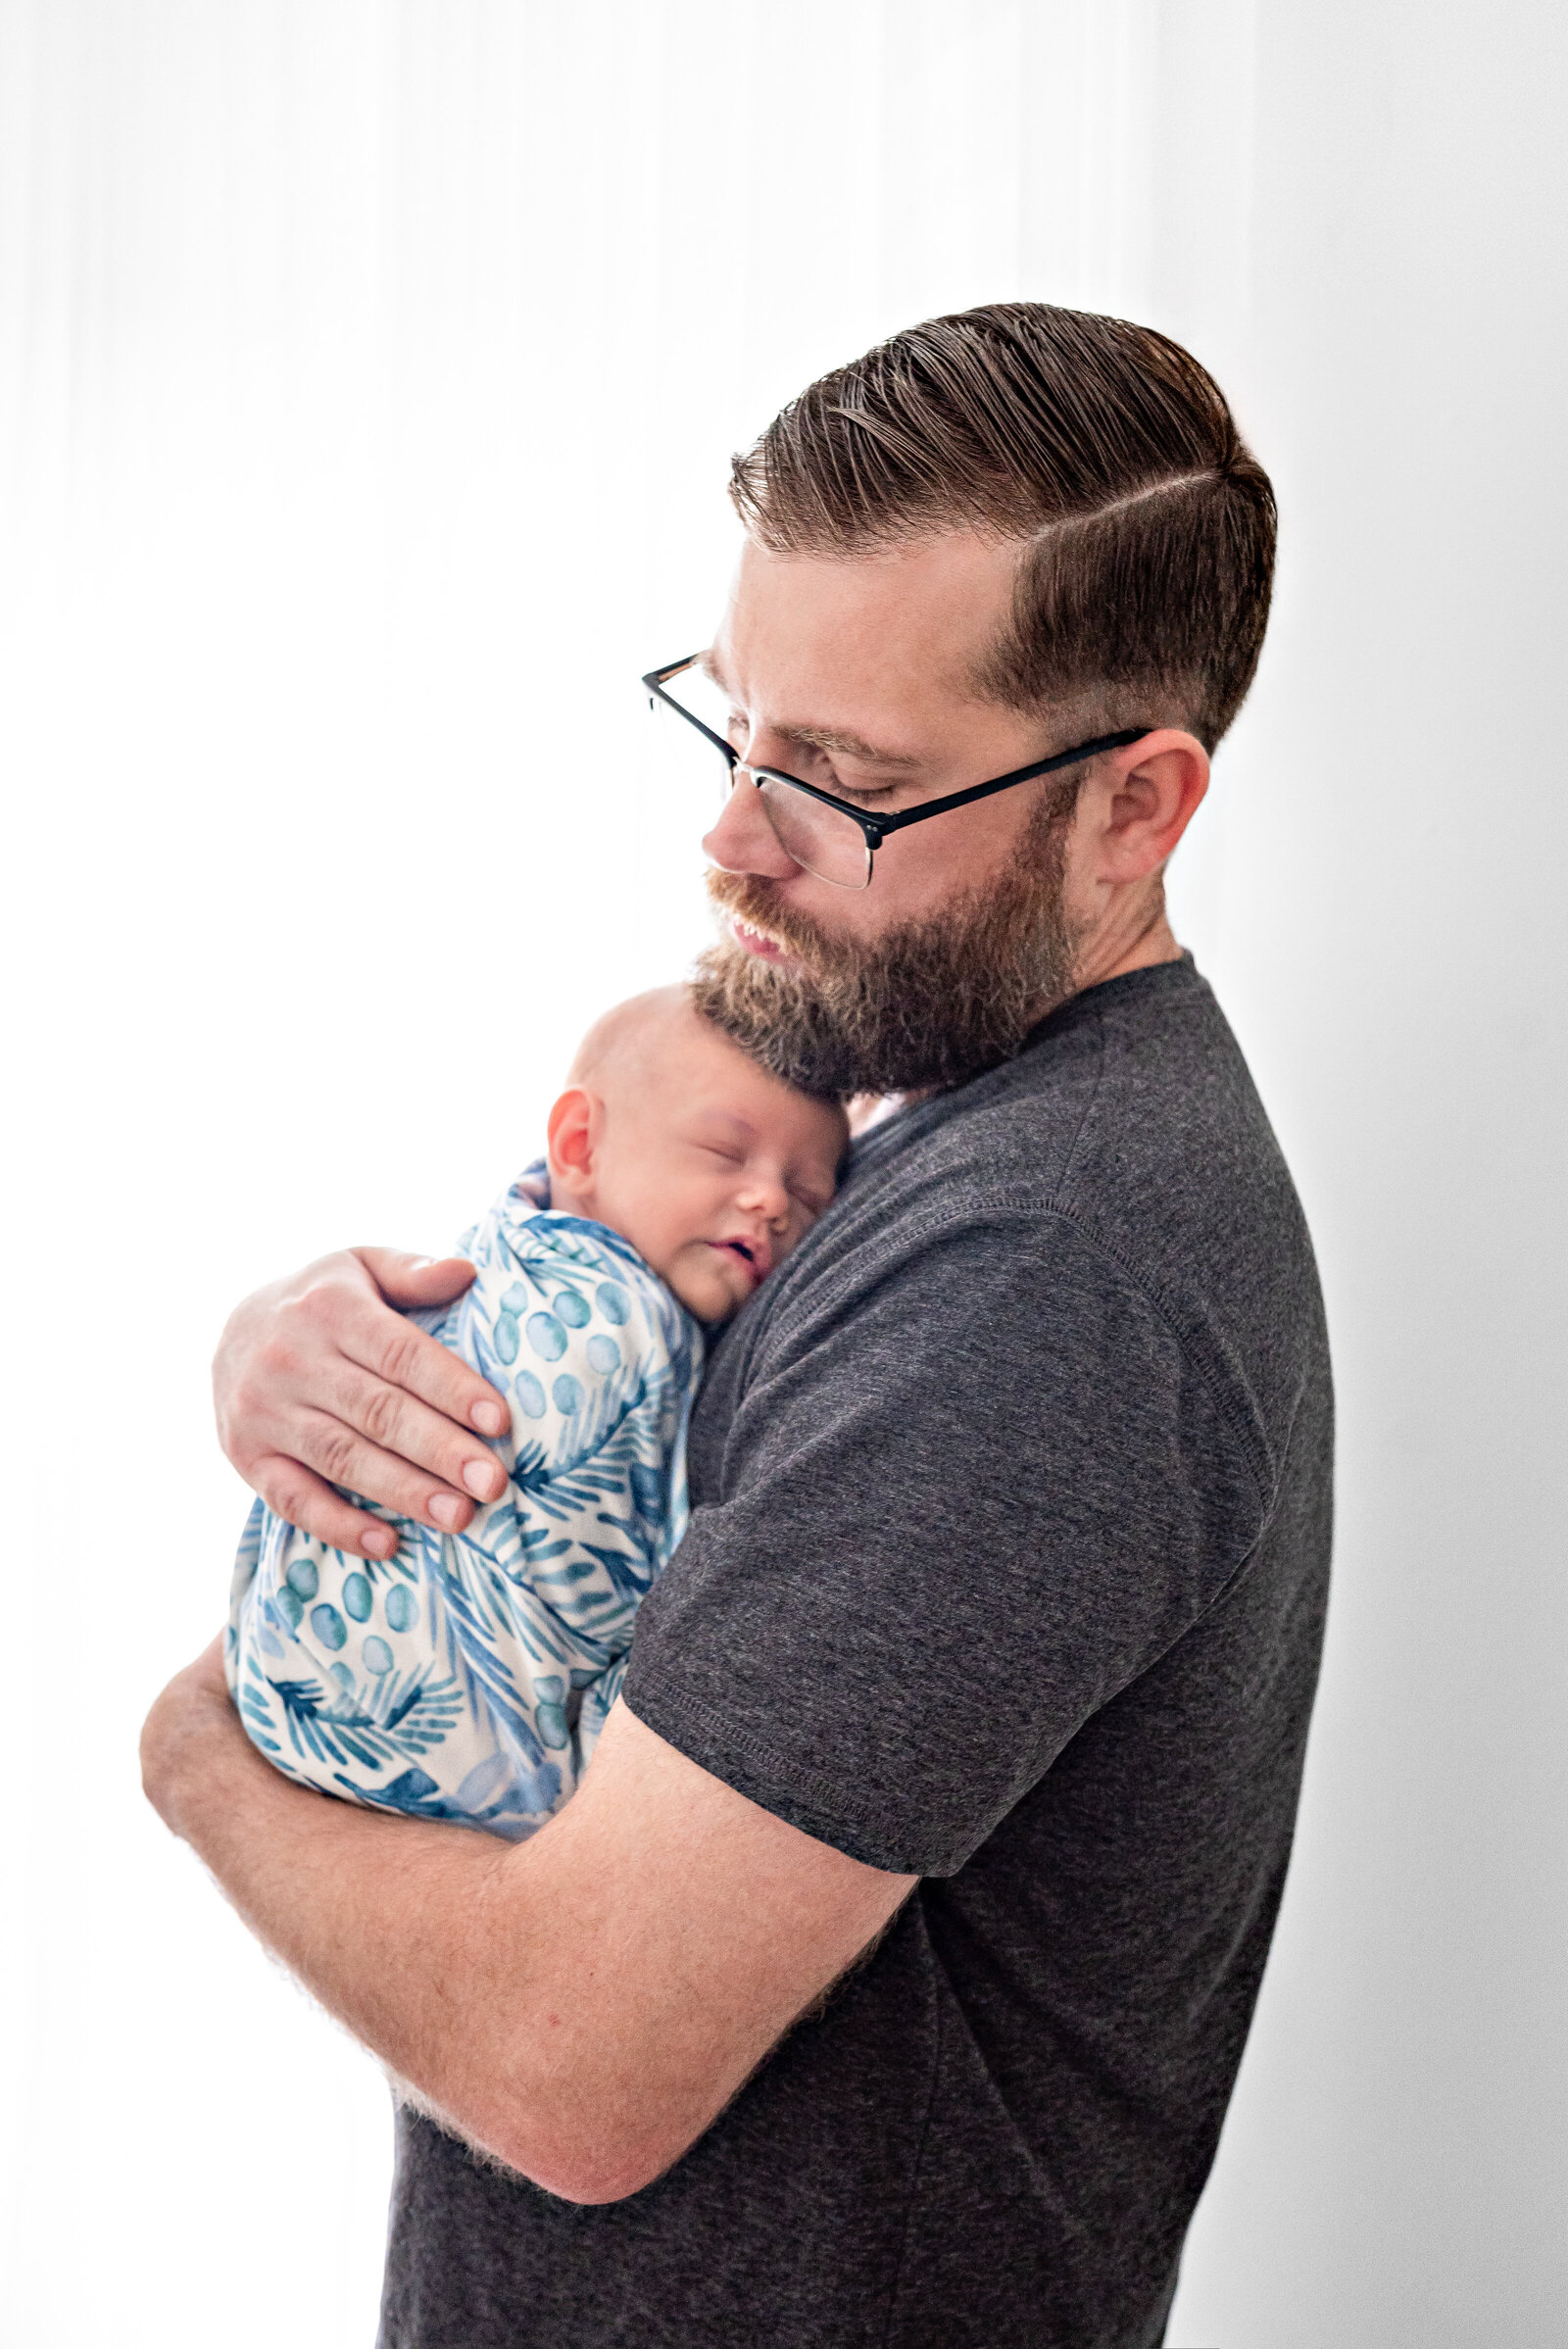 A father holding his newborn baby during newborn photos in a studio in Huntsville